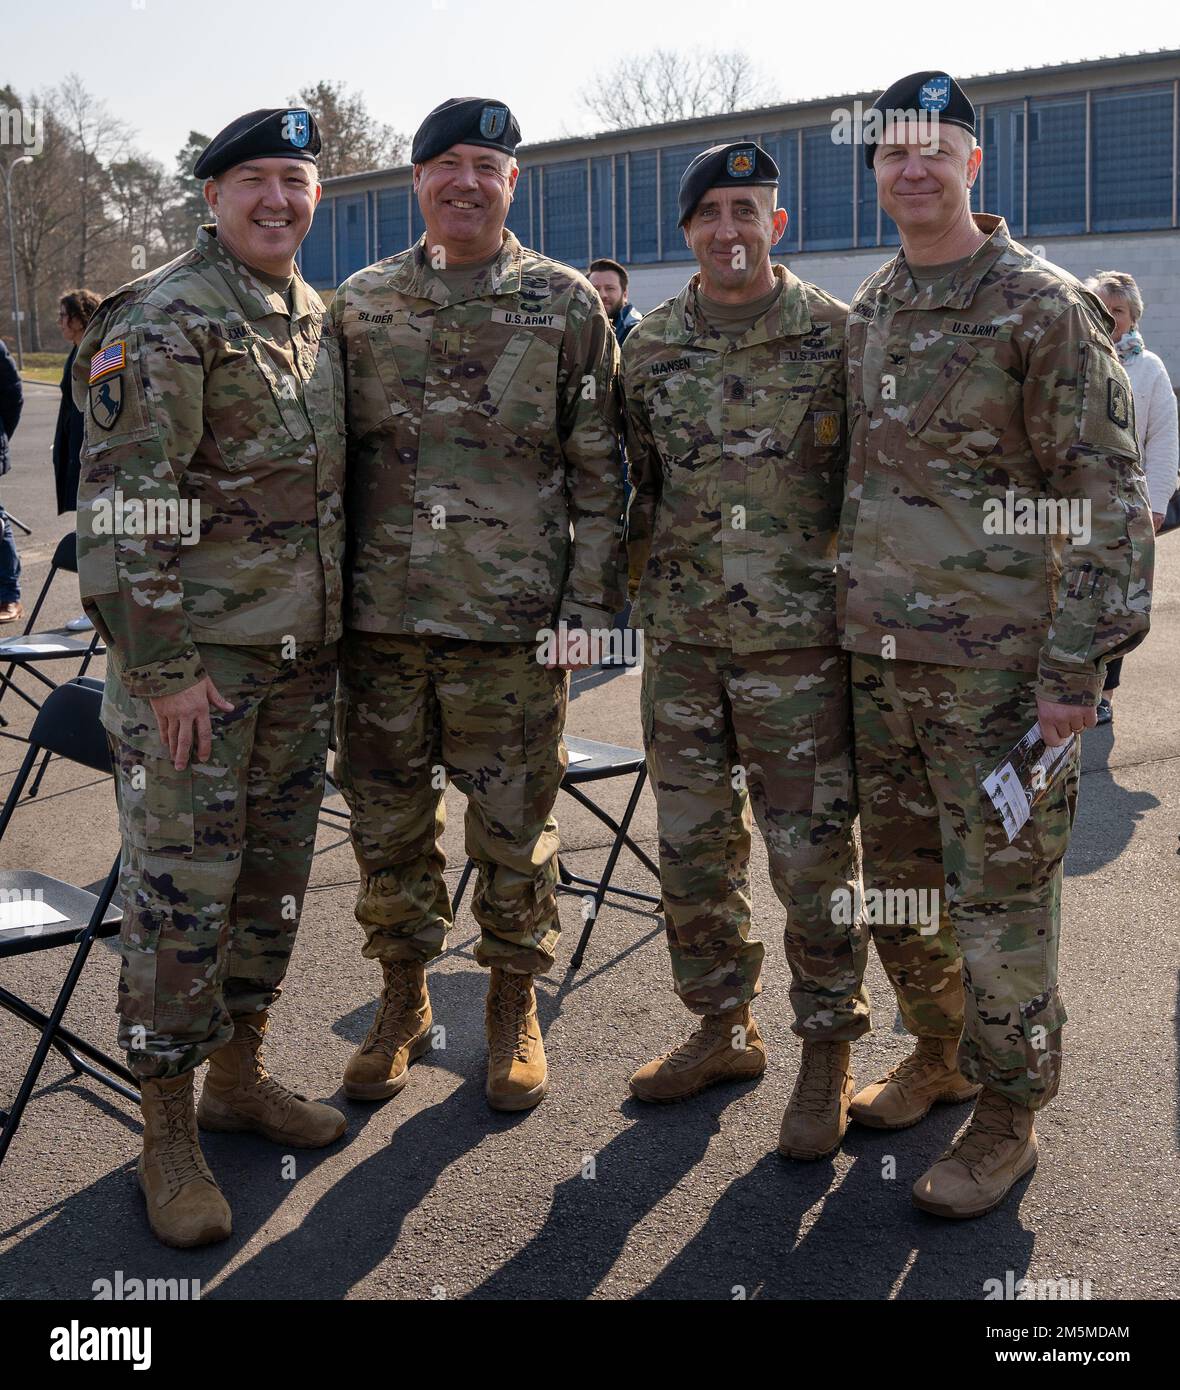 Brig. Gen. Jed Schaertl (left) , deputy commanding general for mobilization and reserve affairs with the U.S. Army Europe and Africa Command, stands with Col. Patrick Schuck (right), commander, 12th Combat Aviation Brigade, Command Sgt. Maj. Zane Hanson, 12 CAB command sergeant major,  and Chief Warrant Officer 5 Robert Slider, 12 CAB command chief warrant officer on the parade ground of Herrenwaldkaserne barracks, Germany, March 25, 2022. The 12th Combat Aviation Brigade was invited to attend the change of command for the Rapid Response Forces Division. 12 CAB is among other units assigned to Stock Photo